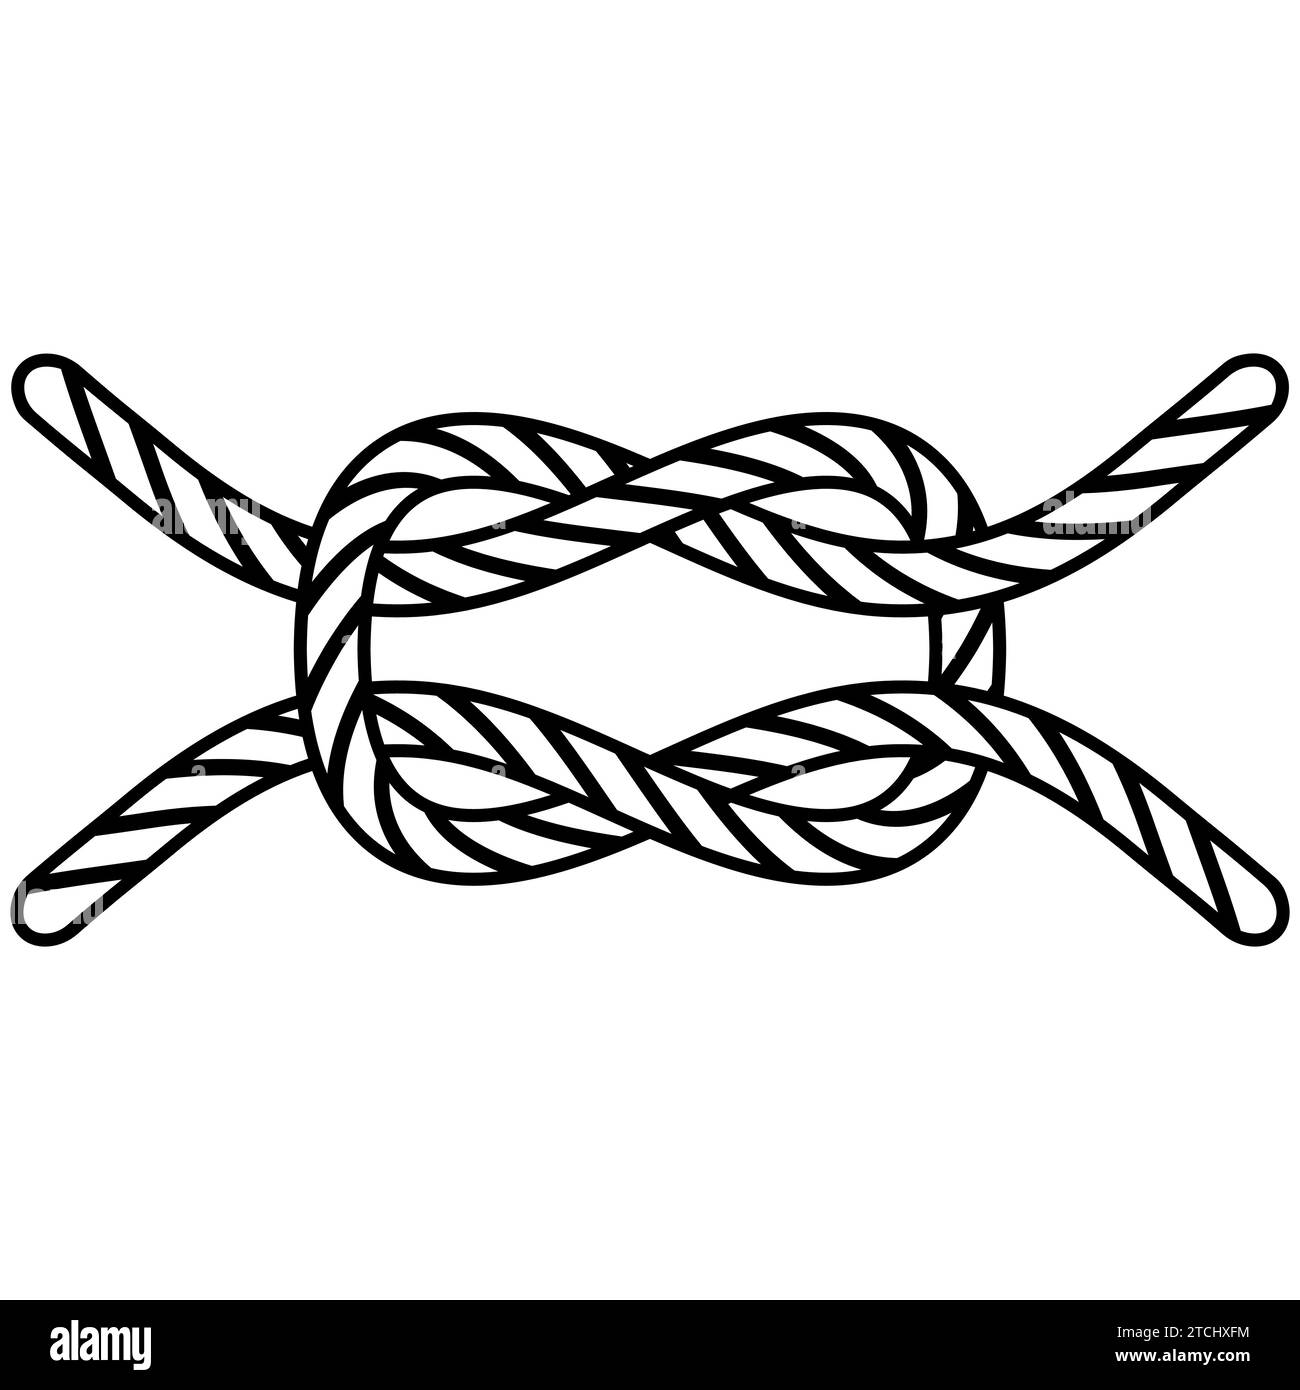 Ropes tie Black and White Stock Photos & Images - Alamy